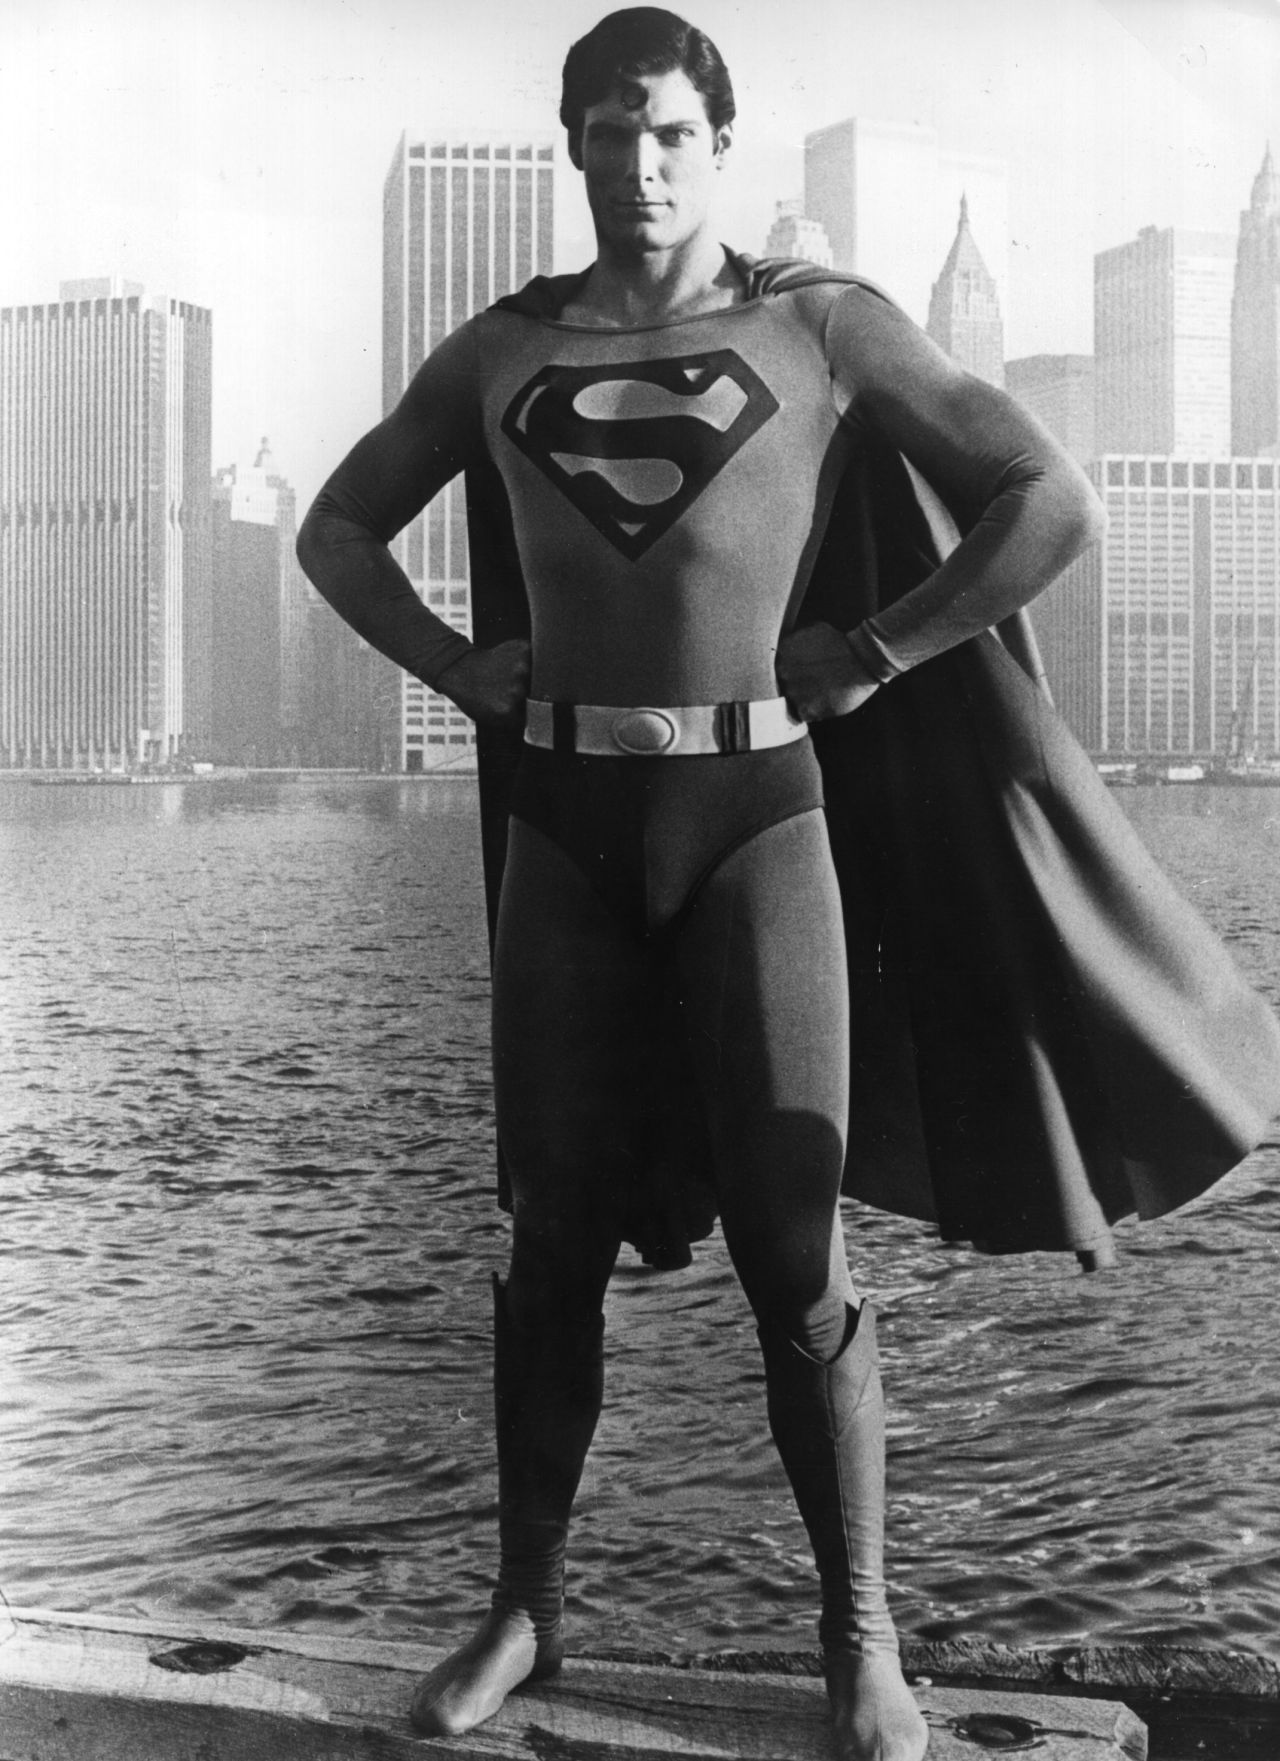 The late Christopher Reeve worked the Krypton native's red cape in 1978's "Superman" (and its three sequels). Brandon Routh took over in 2006's "Superman Returns," and Henry Cavill will do the honors in 2013's "Man of Steel."